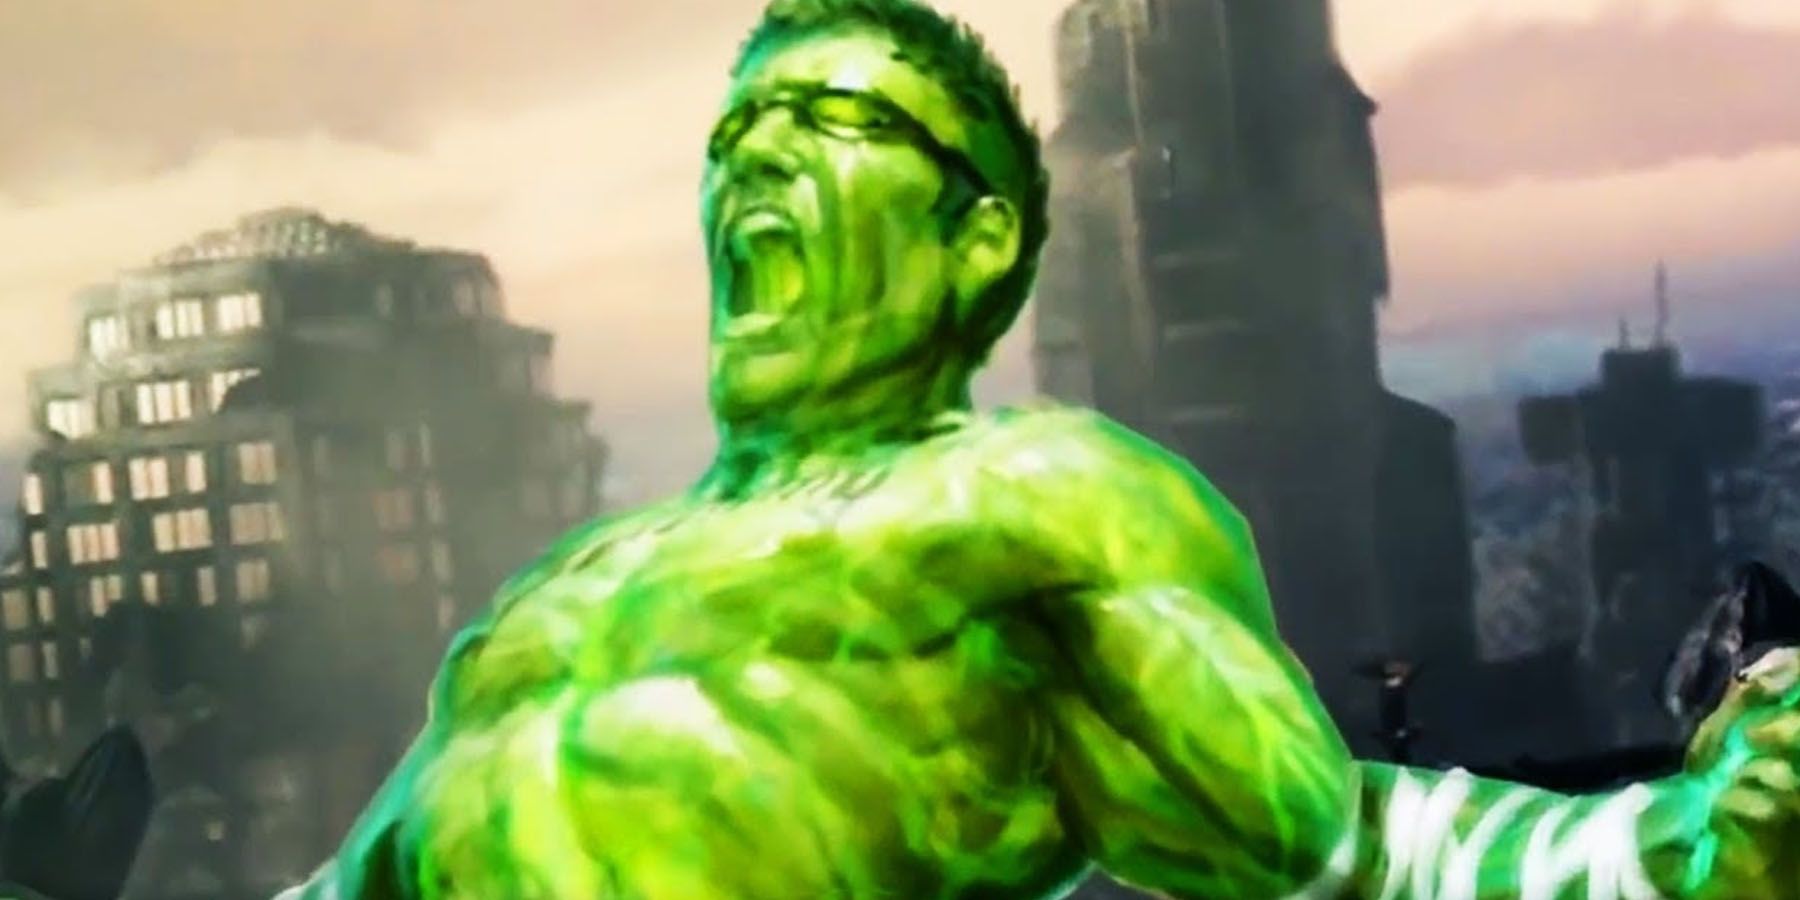 Johnny Cage tapping into Green Energy